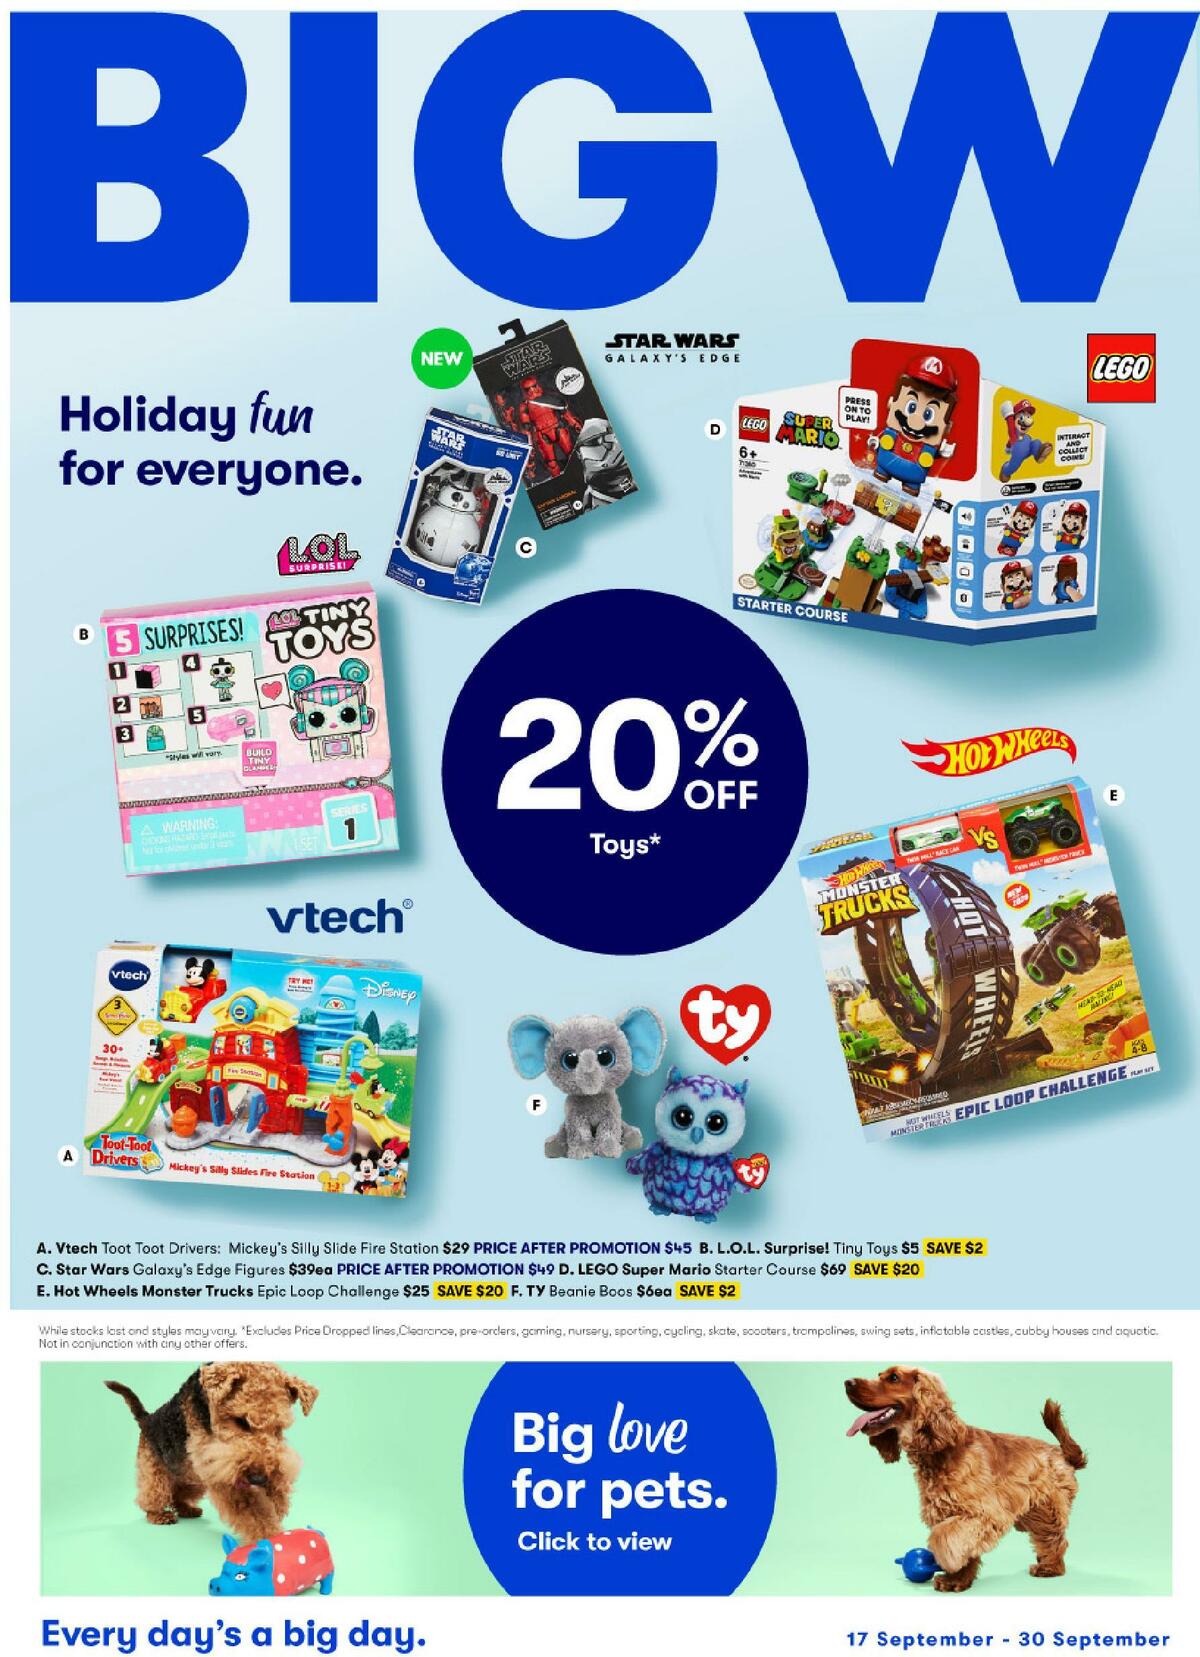 Big W Holiday Fun for Everyone Catalogues from 17 September